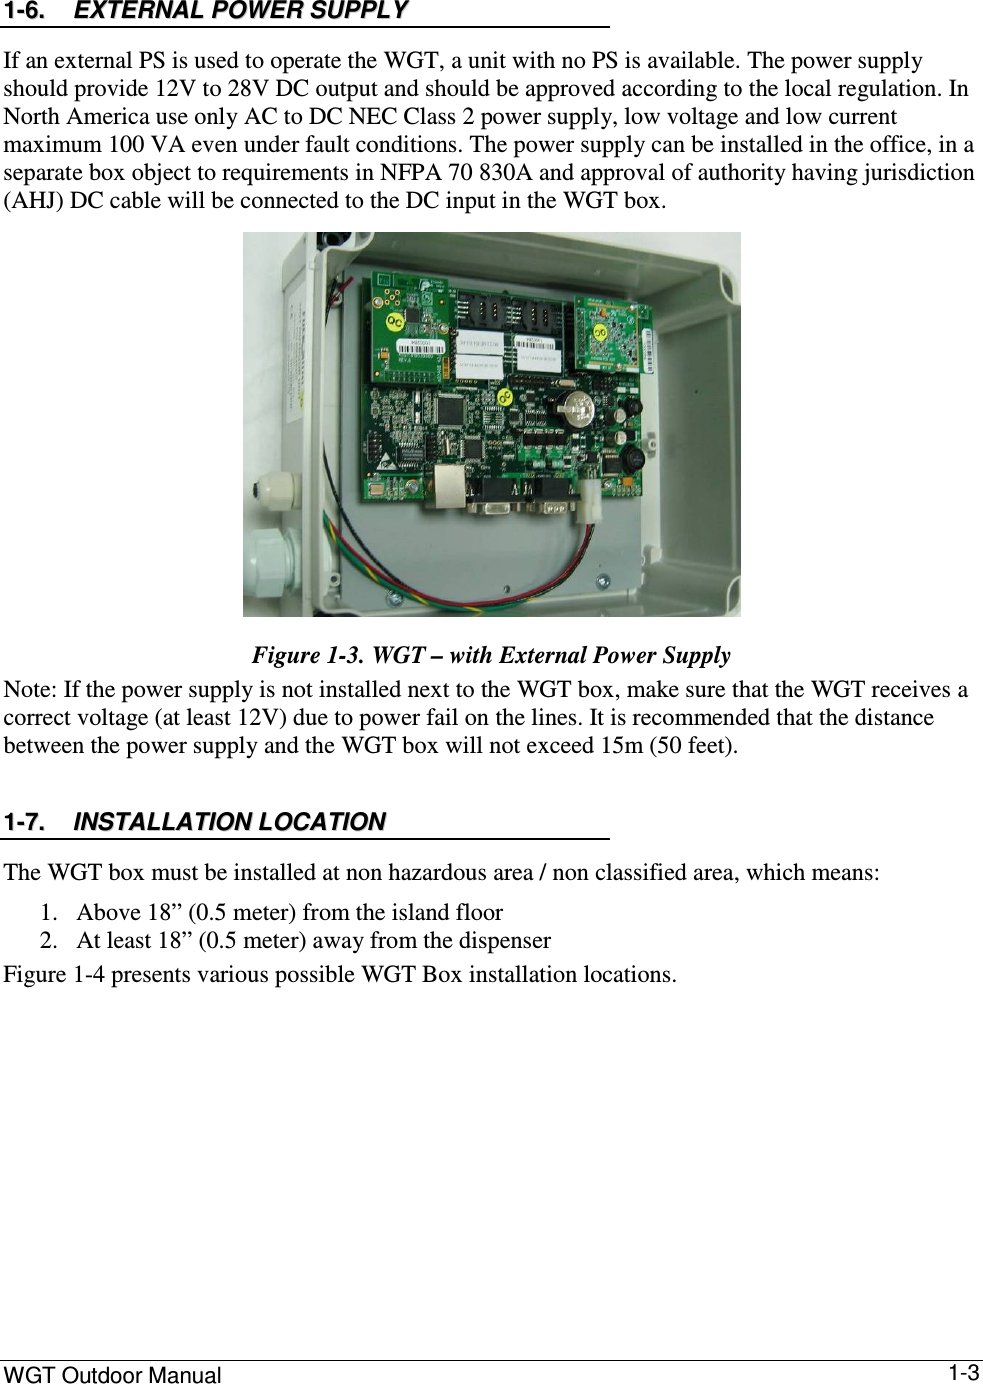 WGT Outdoor Manual      1-3 11--66..  EEXXTTEERRNNAALL  PPOOWWEERR  SSUUPPPPLLYY  If an external PS is used to operate the WGT, a unit with no PS is available. The power supply should provide 12V to 28V DC output and should be approved according to the local regulation. In North America use only AC to DC NEC Class 2 power supply, low voltage and low current maximum 100 VA even under fault conditions. The power supply can be installed in the office, in a separate box object to requirements in NFPA 70 830A and approval of authority having jurisdiction (AHJ) DC cable will be connected to the DC input in the WGT box.  Figure  1-3. WGT – with External Power Supply  Note: If the power supply is not installed next to the WGT box, make sure that the WGT receives a correct voltage (at least 12V) due to power fail on the lines. It is recommended that the distance between the power supply and the WGT box will not exceed 15m (50 feet). 11--77..  IINNSSTTAALLLLAATTIIOONN  LLOOCCAATTIIOONN  The WGT box must be installed at non hazardous area / non classified area, which means: 1. Above 18” (0.5 meter) from the island floor 2. At least 18” (0.5 meter) away from the dispenser Figure  1-4 presents various possible WGT Box installation locations.  